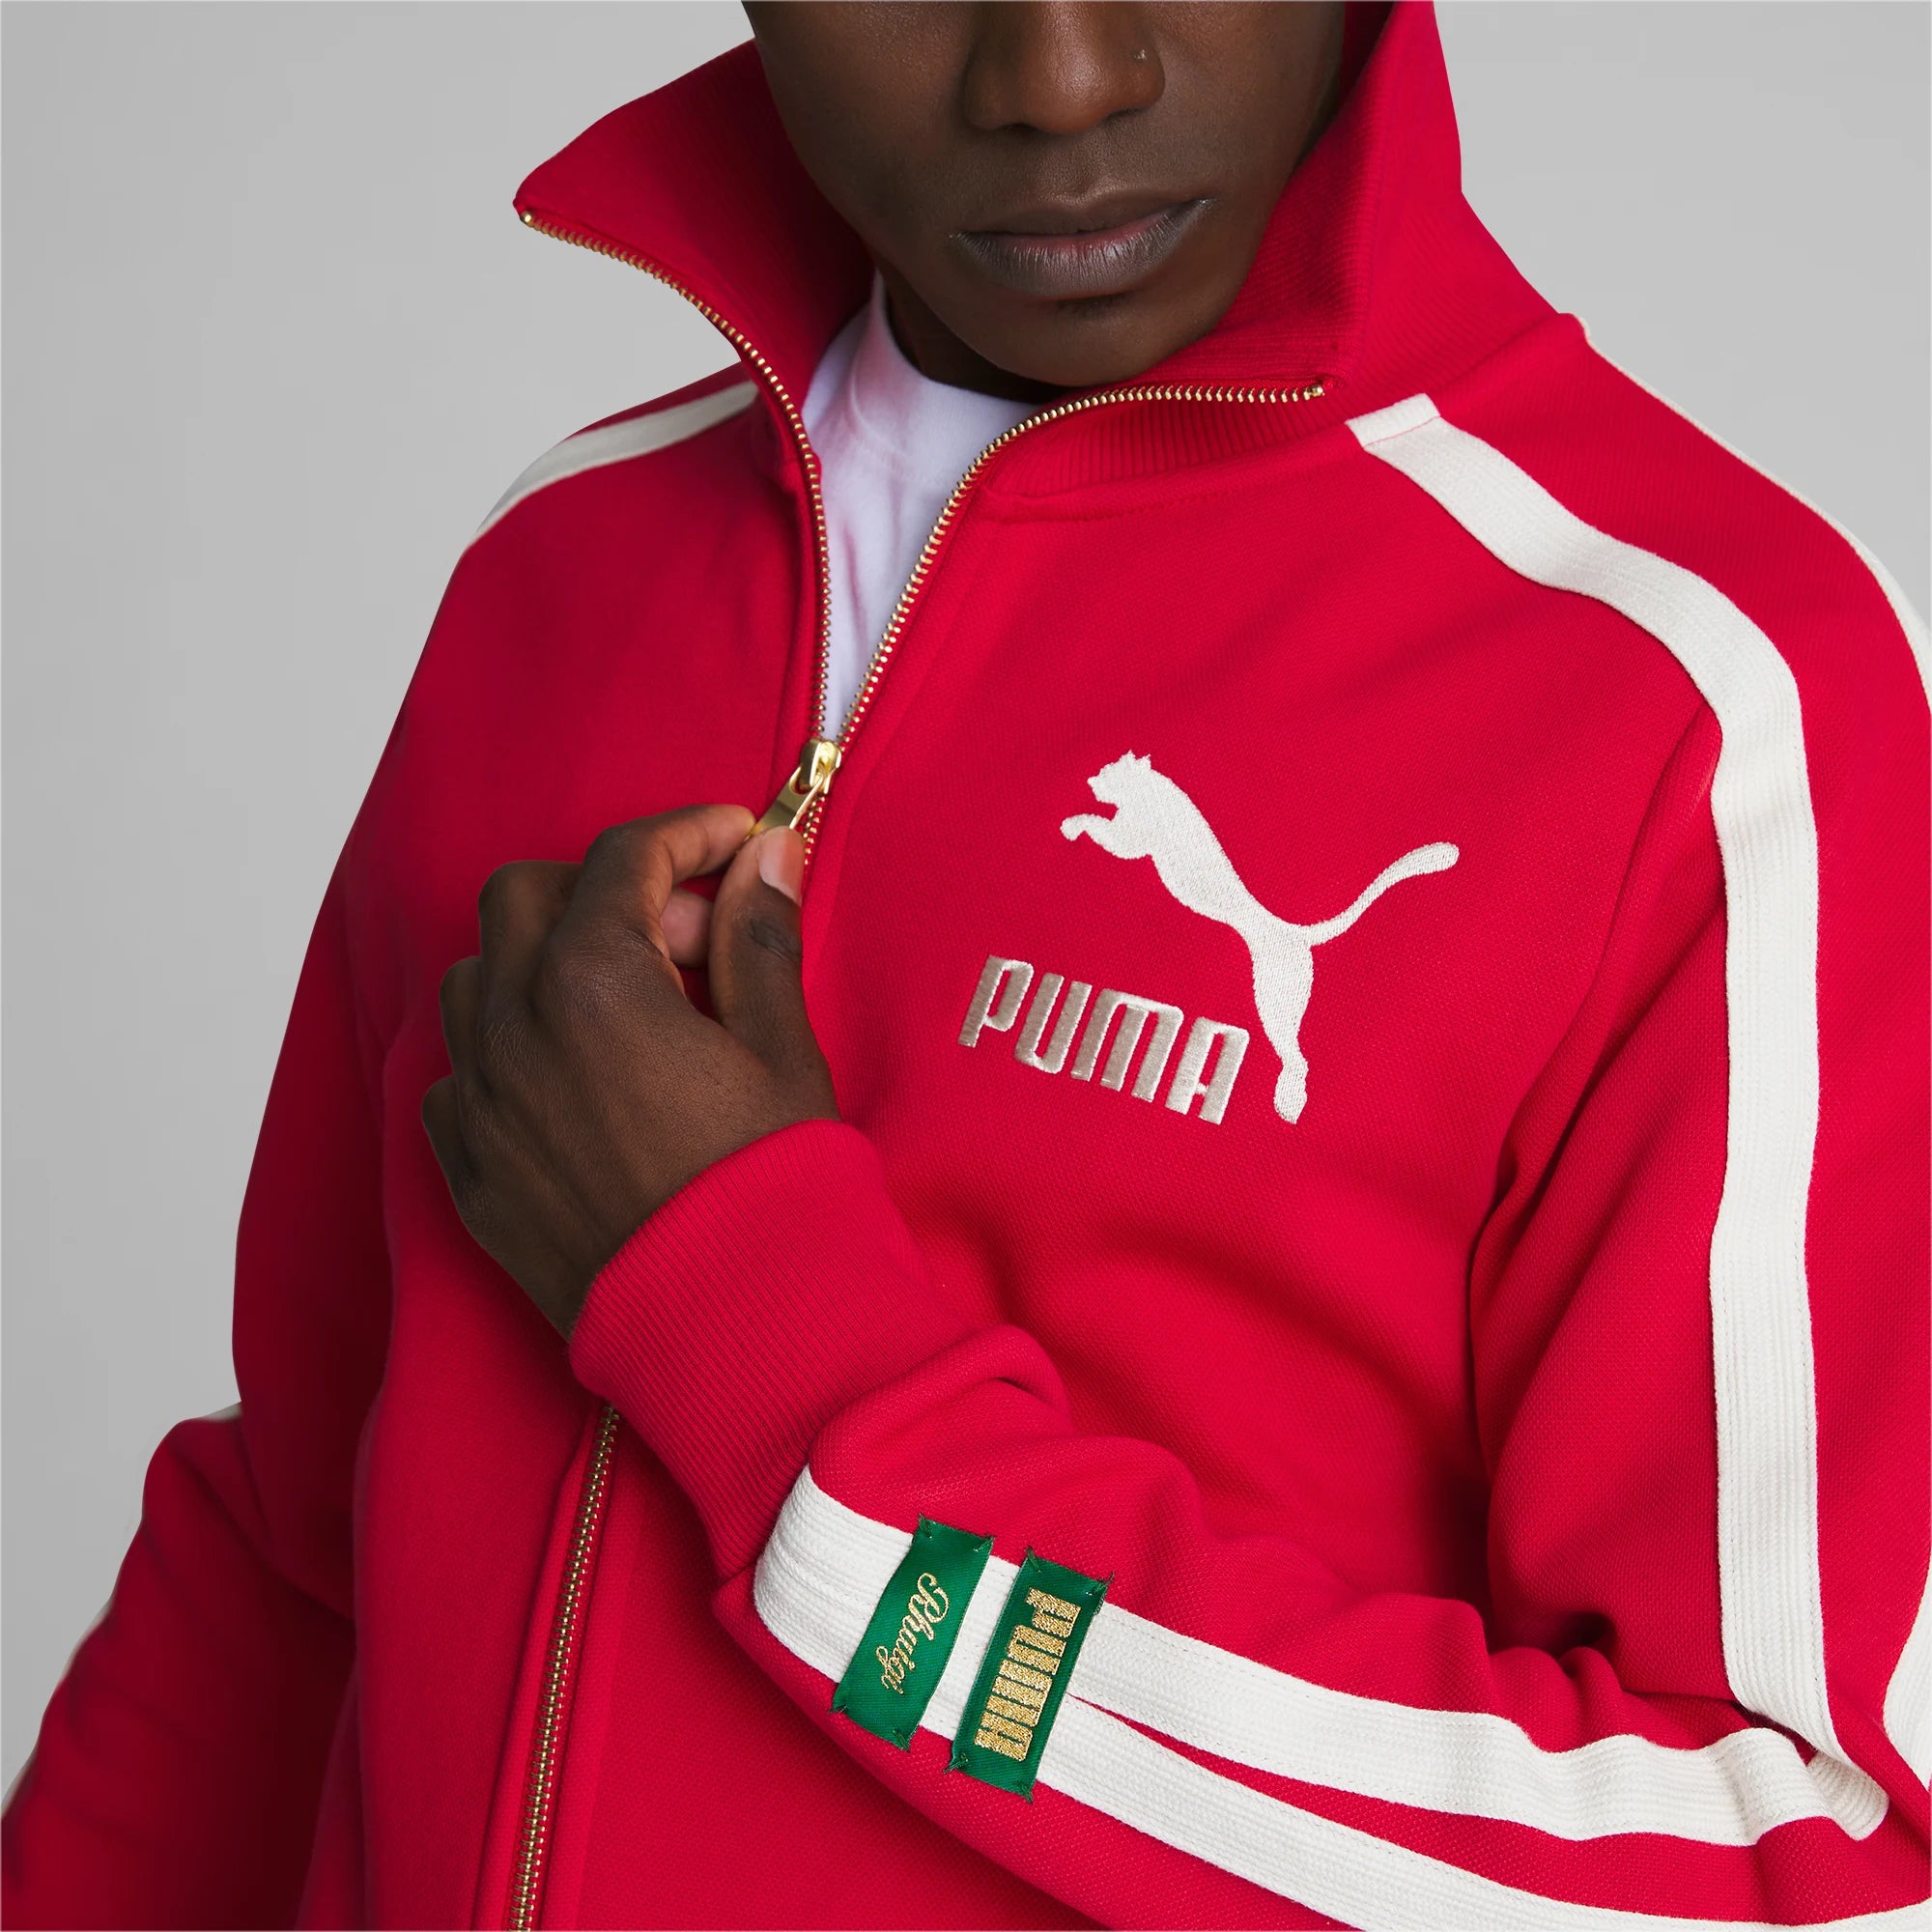 Puma x Rhuigi T7 Track Top For All Time Red